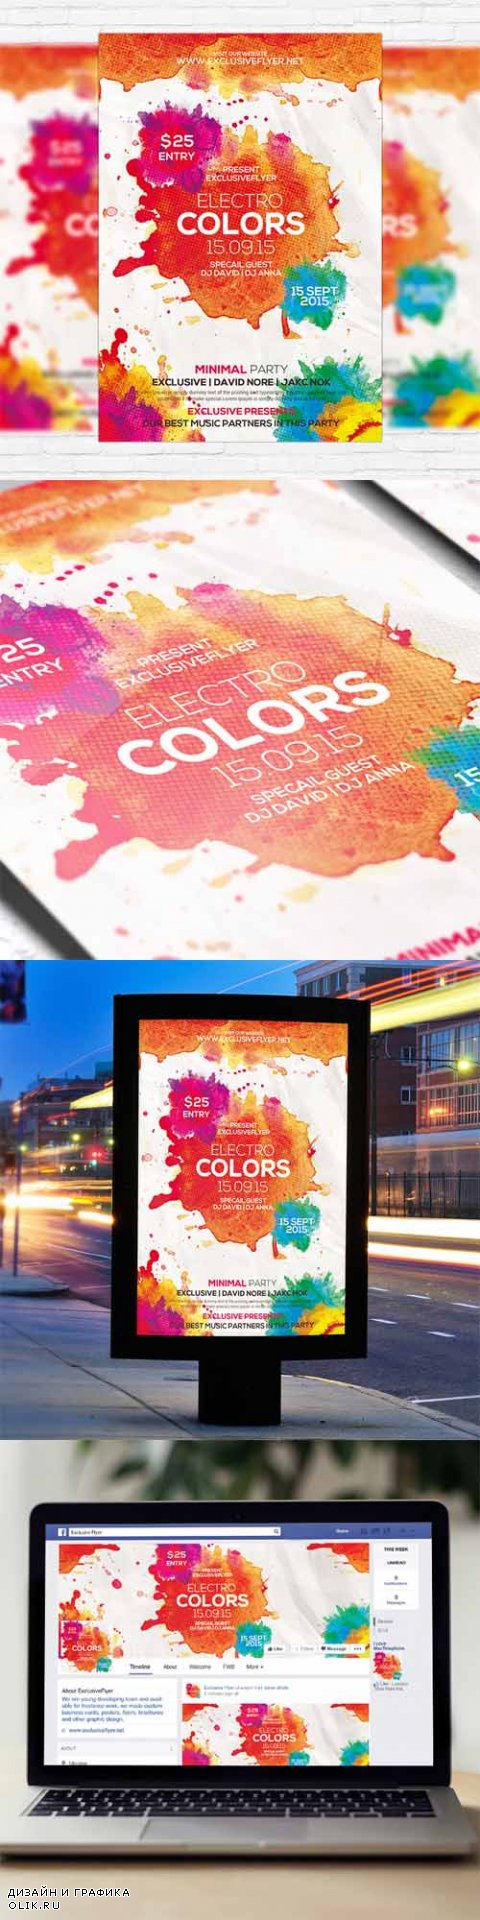 Flyer Template - Electro Colors + Facebook Cover